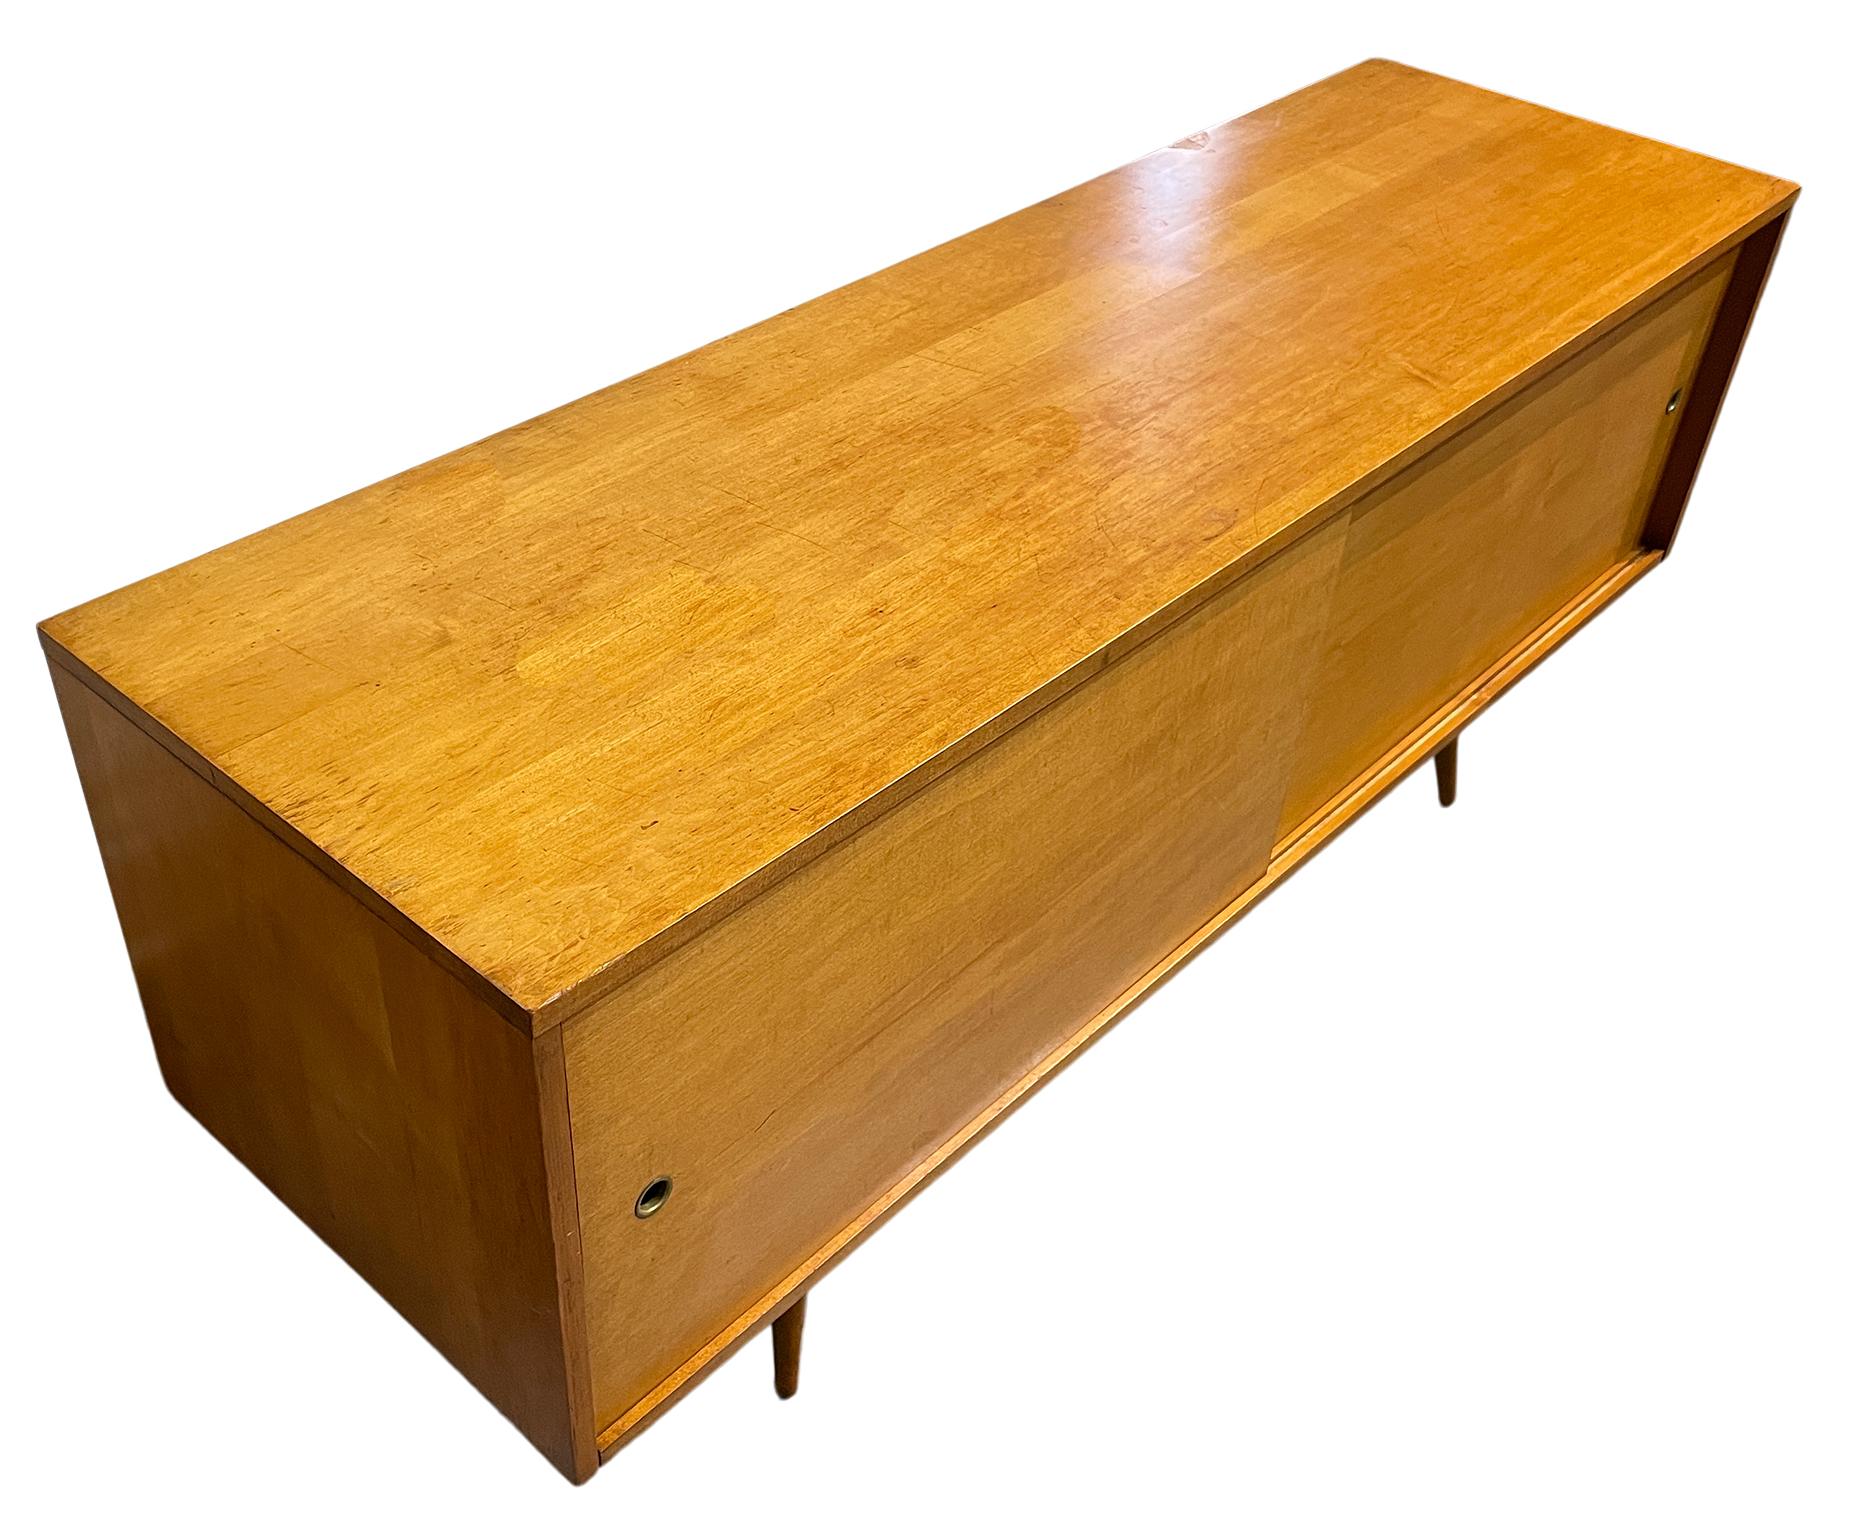 Mid-Century Modern Midcentury Credenza by Paul McCobb Planner Group #1513 Wood Doors Maple For Sale